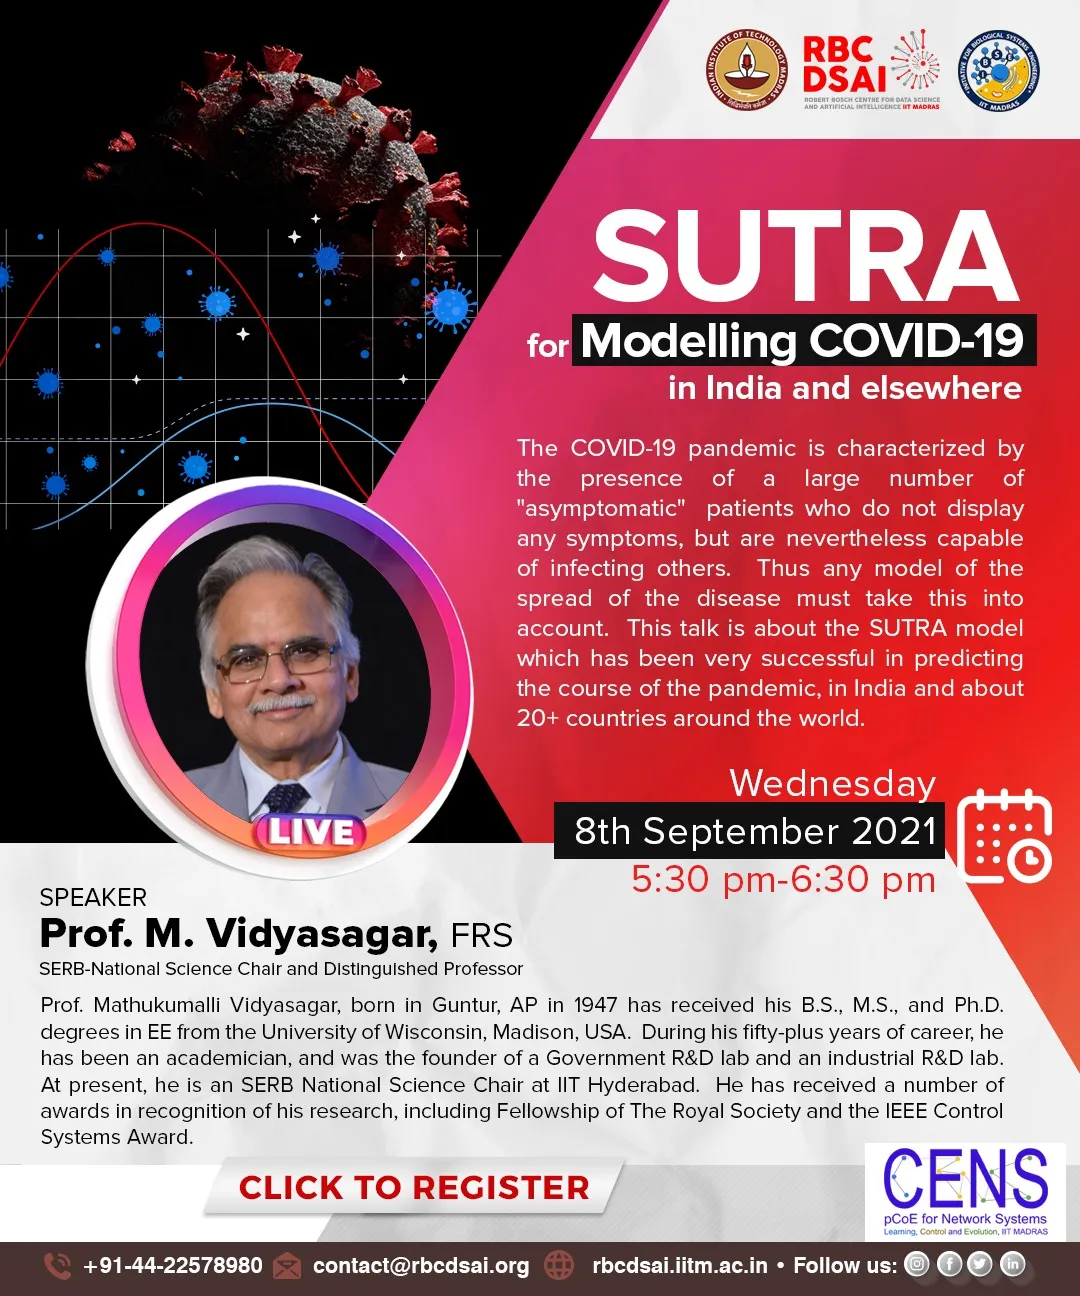 SUTRA for Modelling COVID-19 in India and elsewhere by Prof. M. Vidyasagar